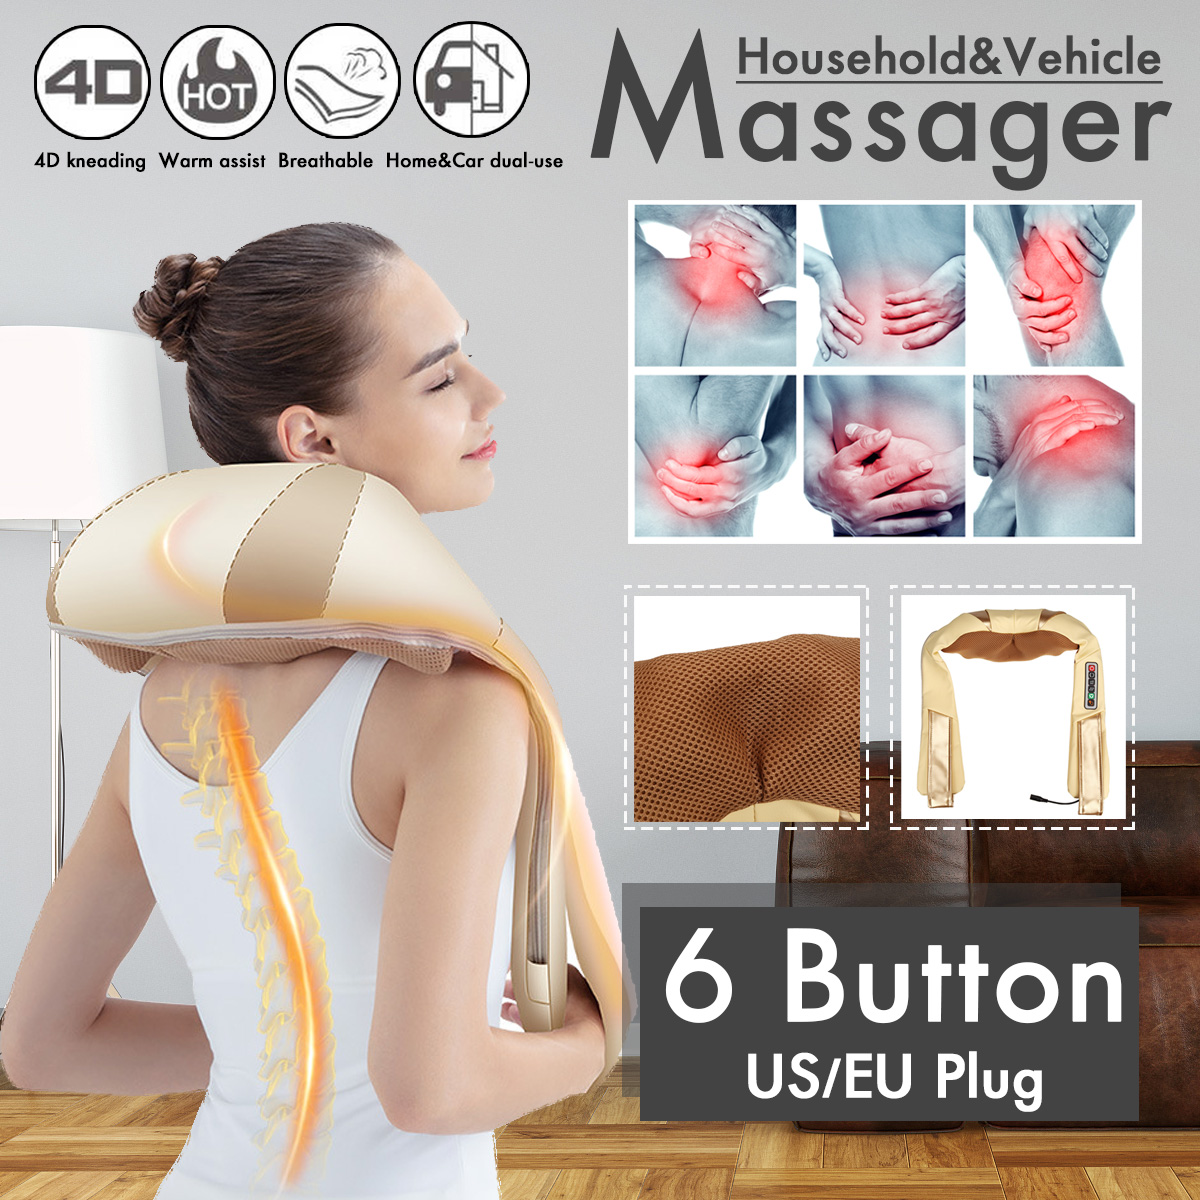 100-220V-Electric-Massager-Infrared-Heating-Neck-Cervical-Shoulder-Pain-Relief-Therapy-Device-1677048-1